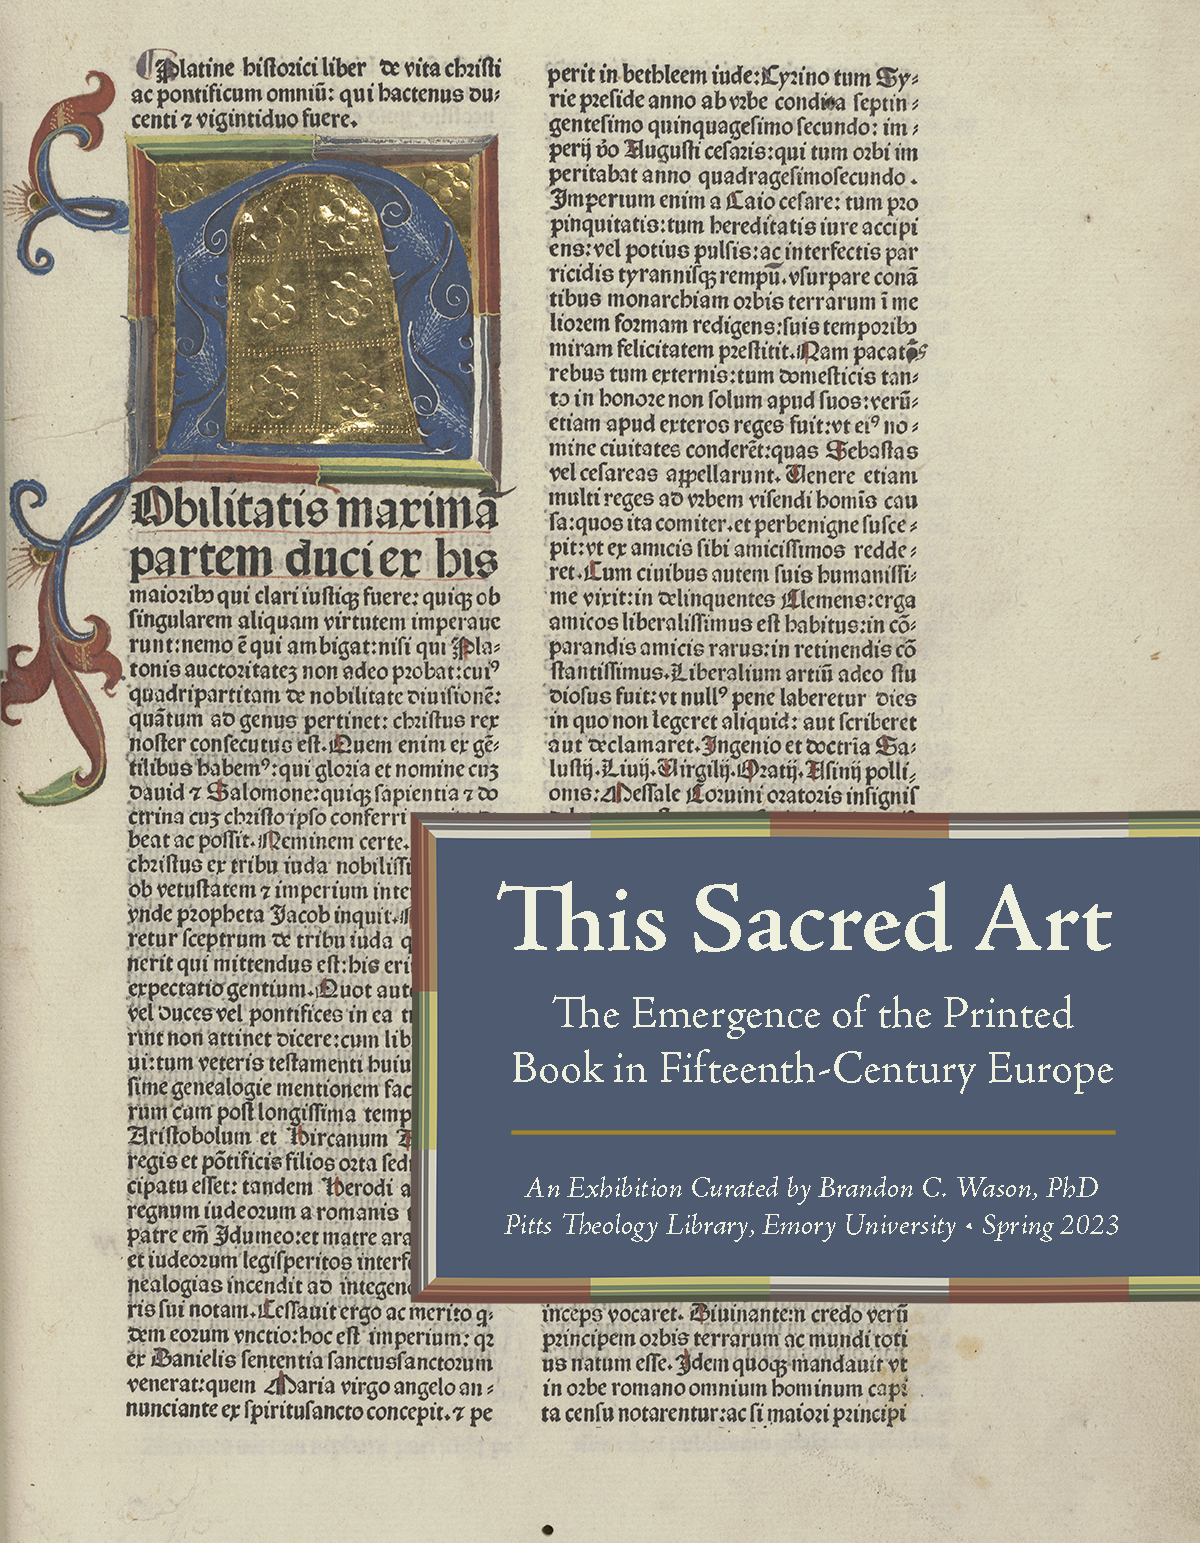 This Sacred Art: The Emergence of the Printed Book in Fifteenth-Century Europe Thumbnail